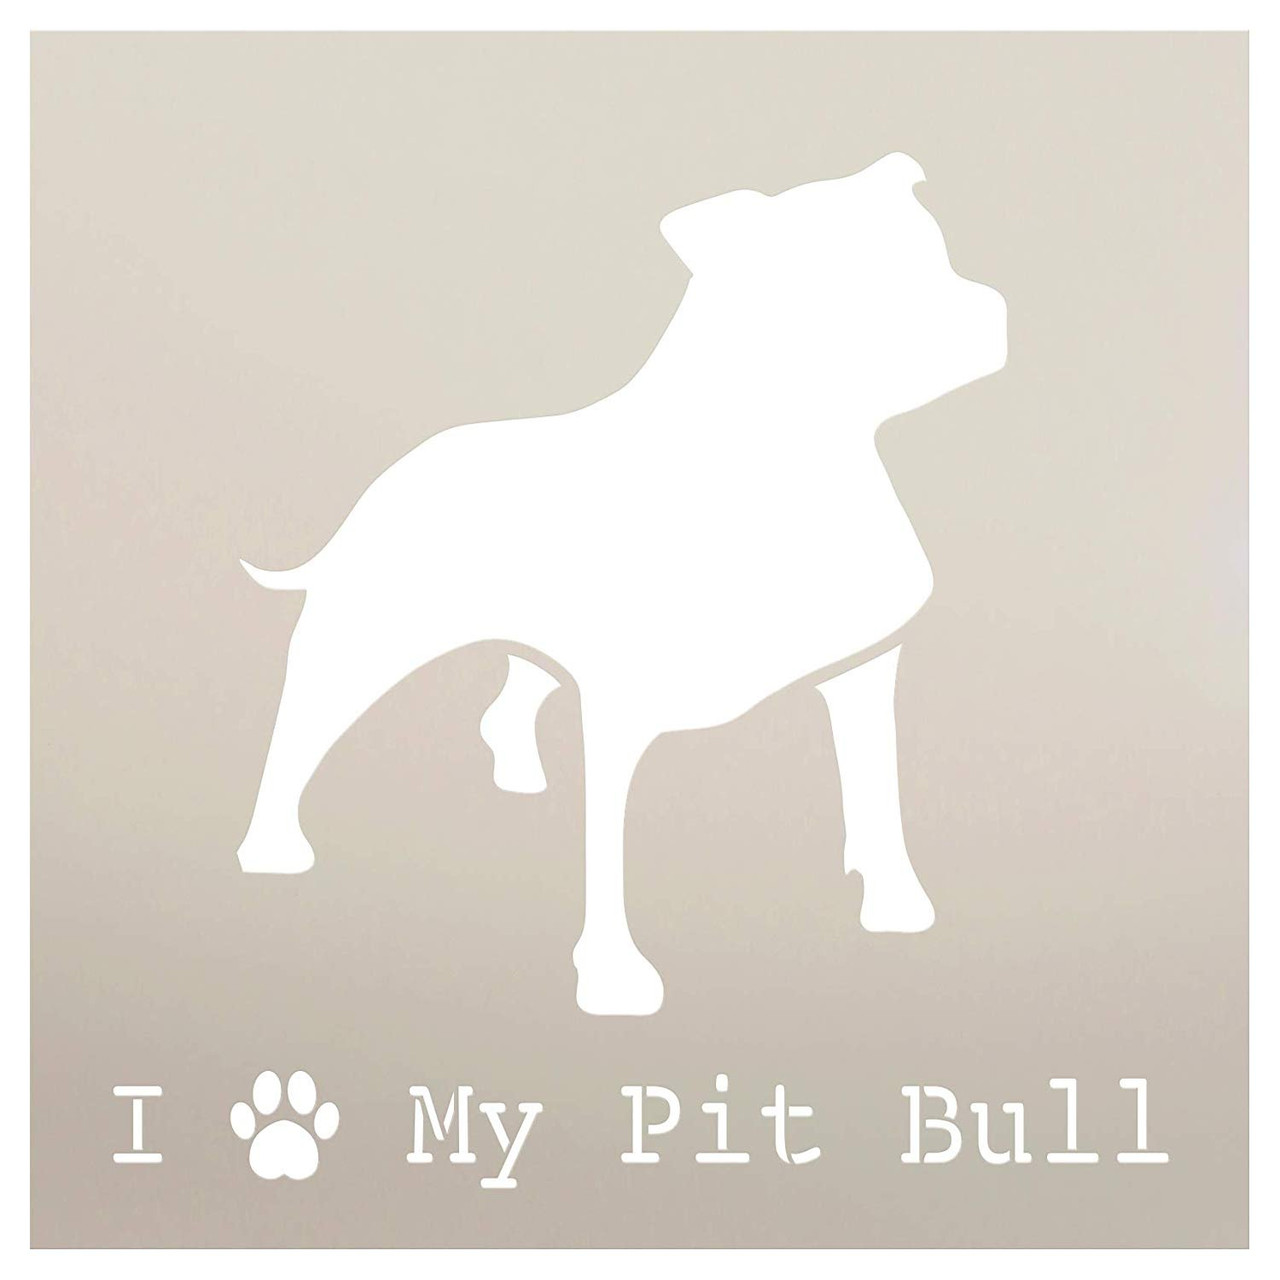 I Heart My Pit Bull with Paw Print Stencil by StudioR12 | Reusable Mylar Template | Paint Wood Sign | Craft Dog Breed Lover Gift - Family - Friends | DIY Pet Home Decor | Select Size